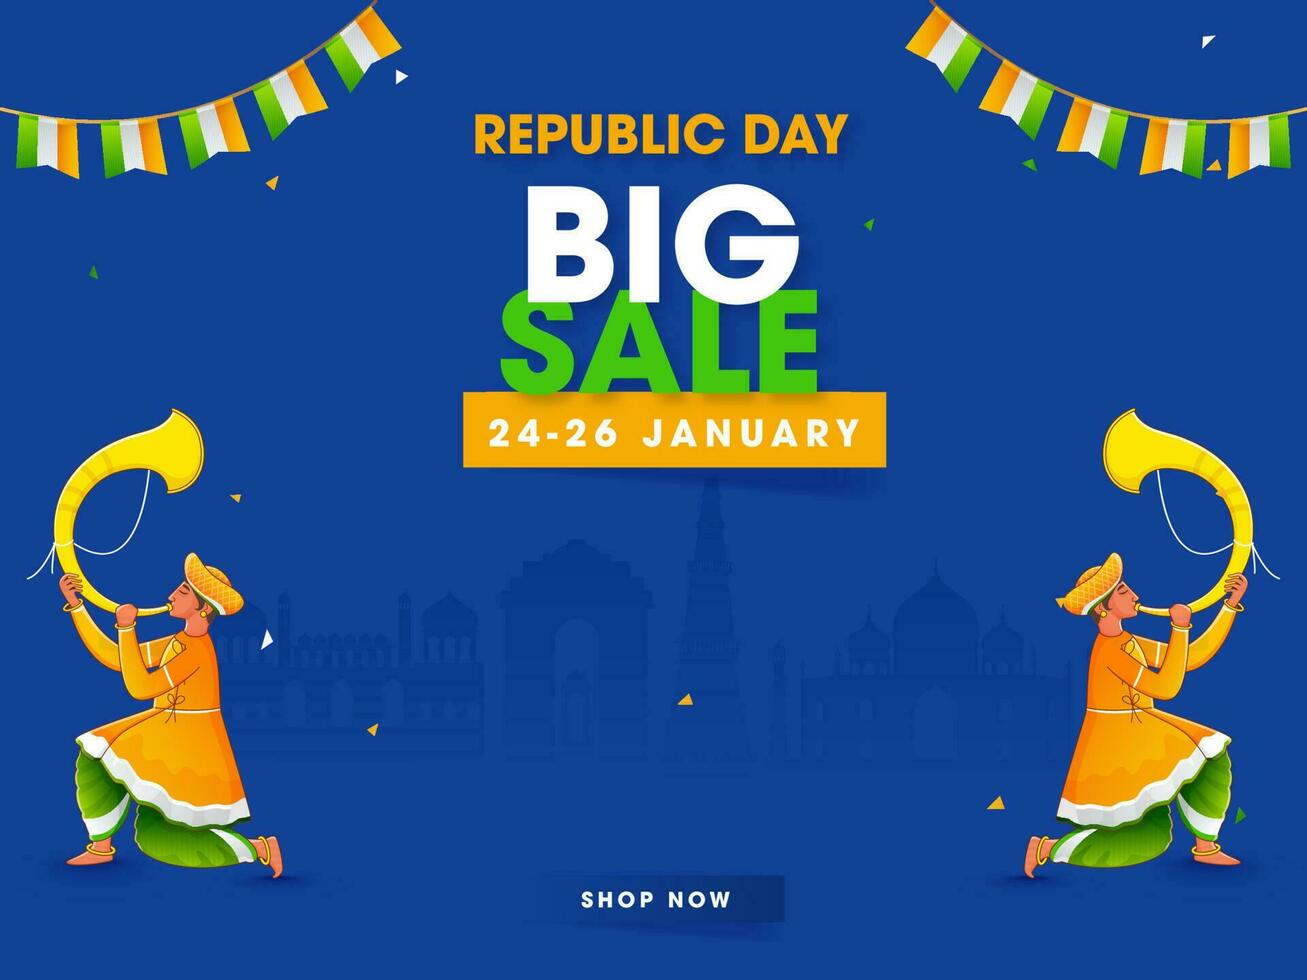 Republic Day Big Sale Poster Design With Tutari Player Men In Traditional Attire And Bunting Flags On Blue Famous Monument Background. vector